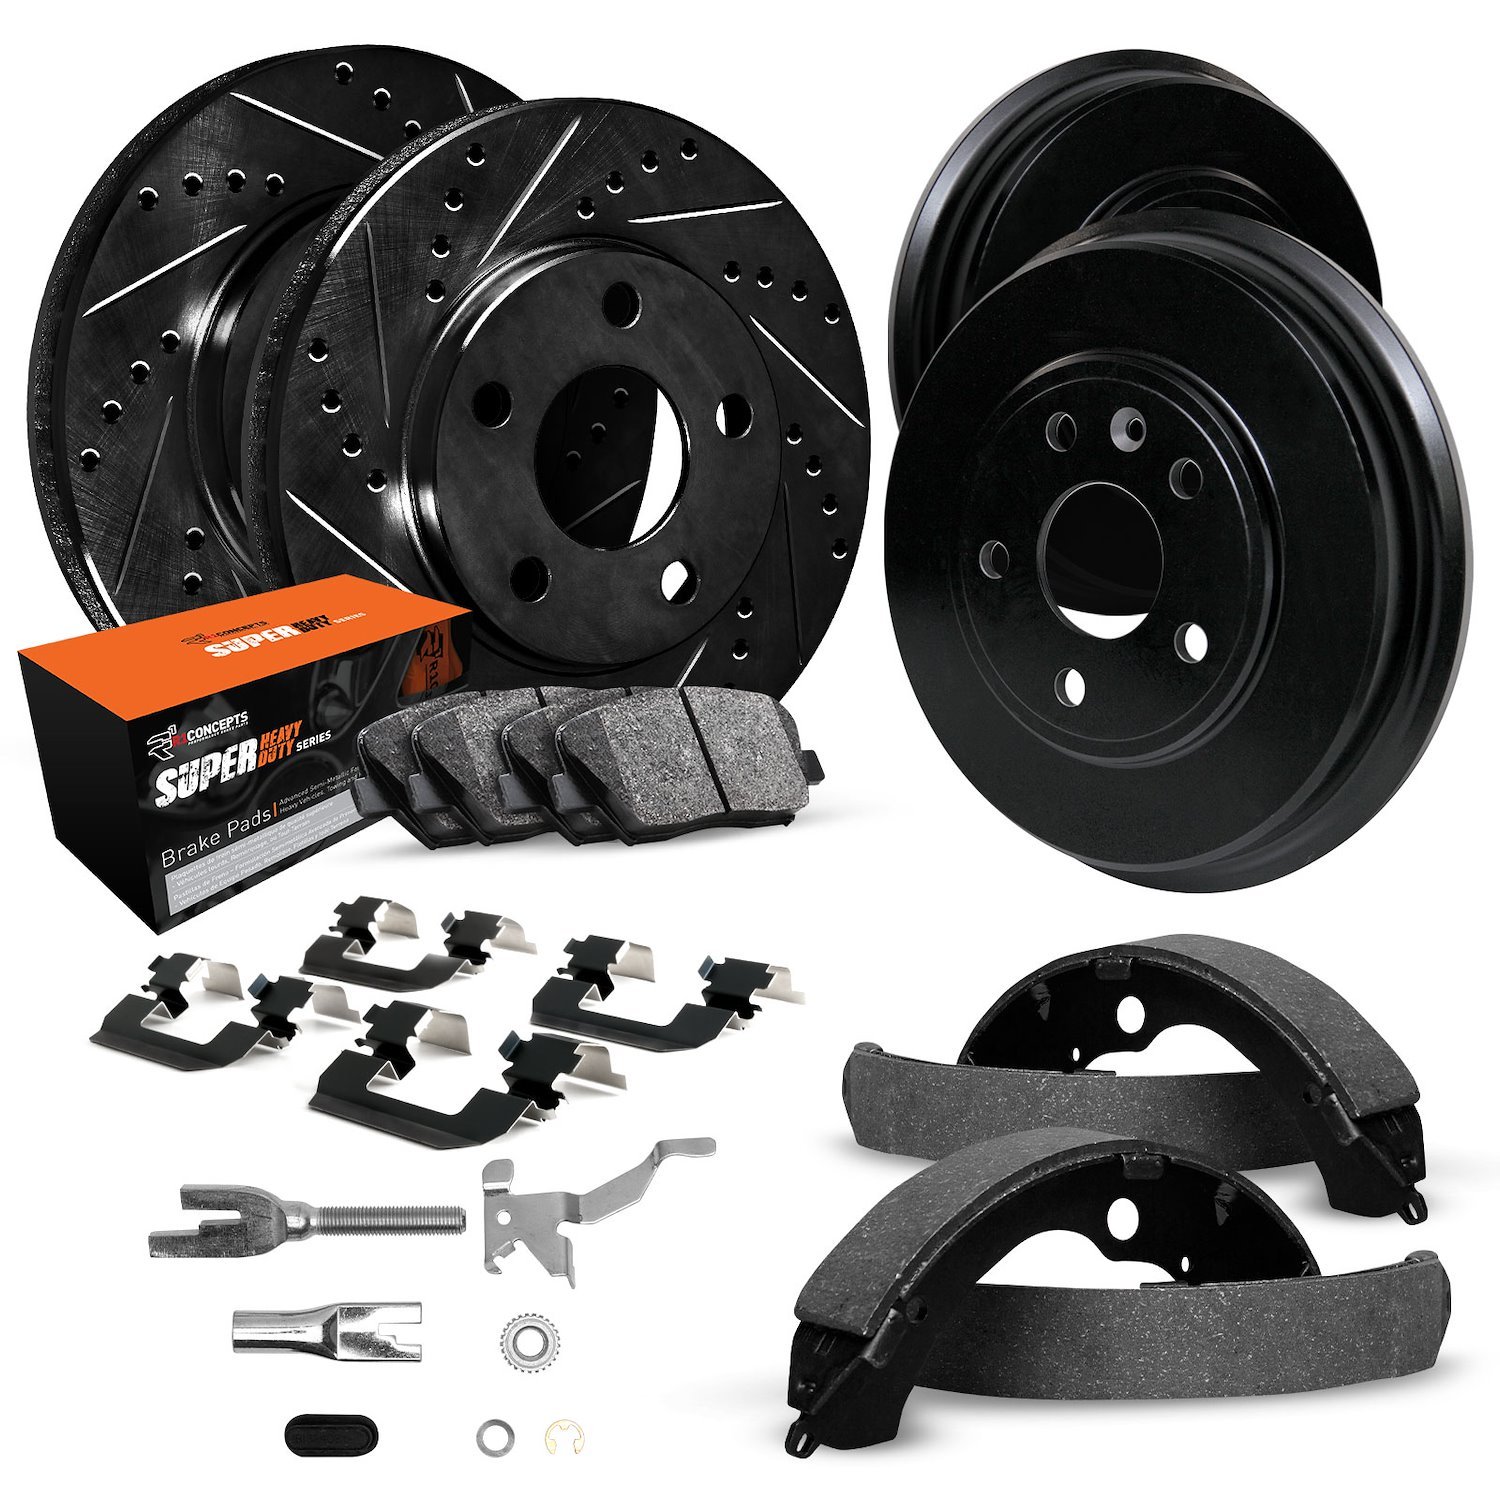 E-Line Drilled/Slotted Black Rotor & Drum Set w/Super-Duty Pads, Shoes, Hardware/Adjusters, 1977-1980 Ford/Lincoln/Mercury/Mazda